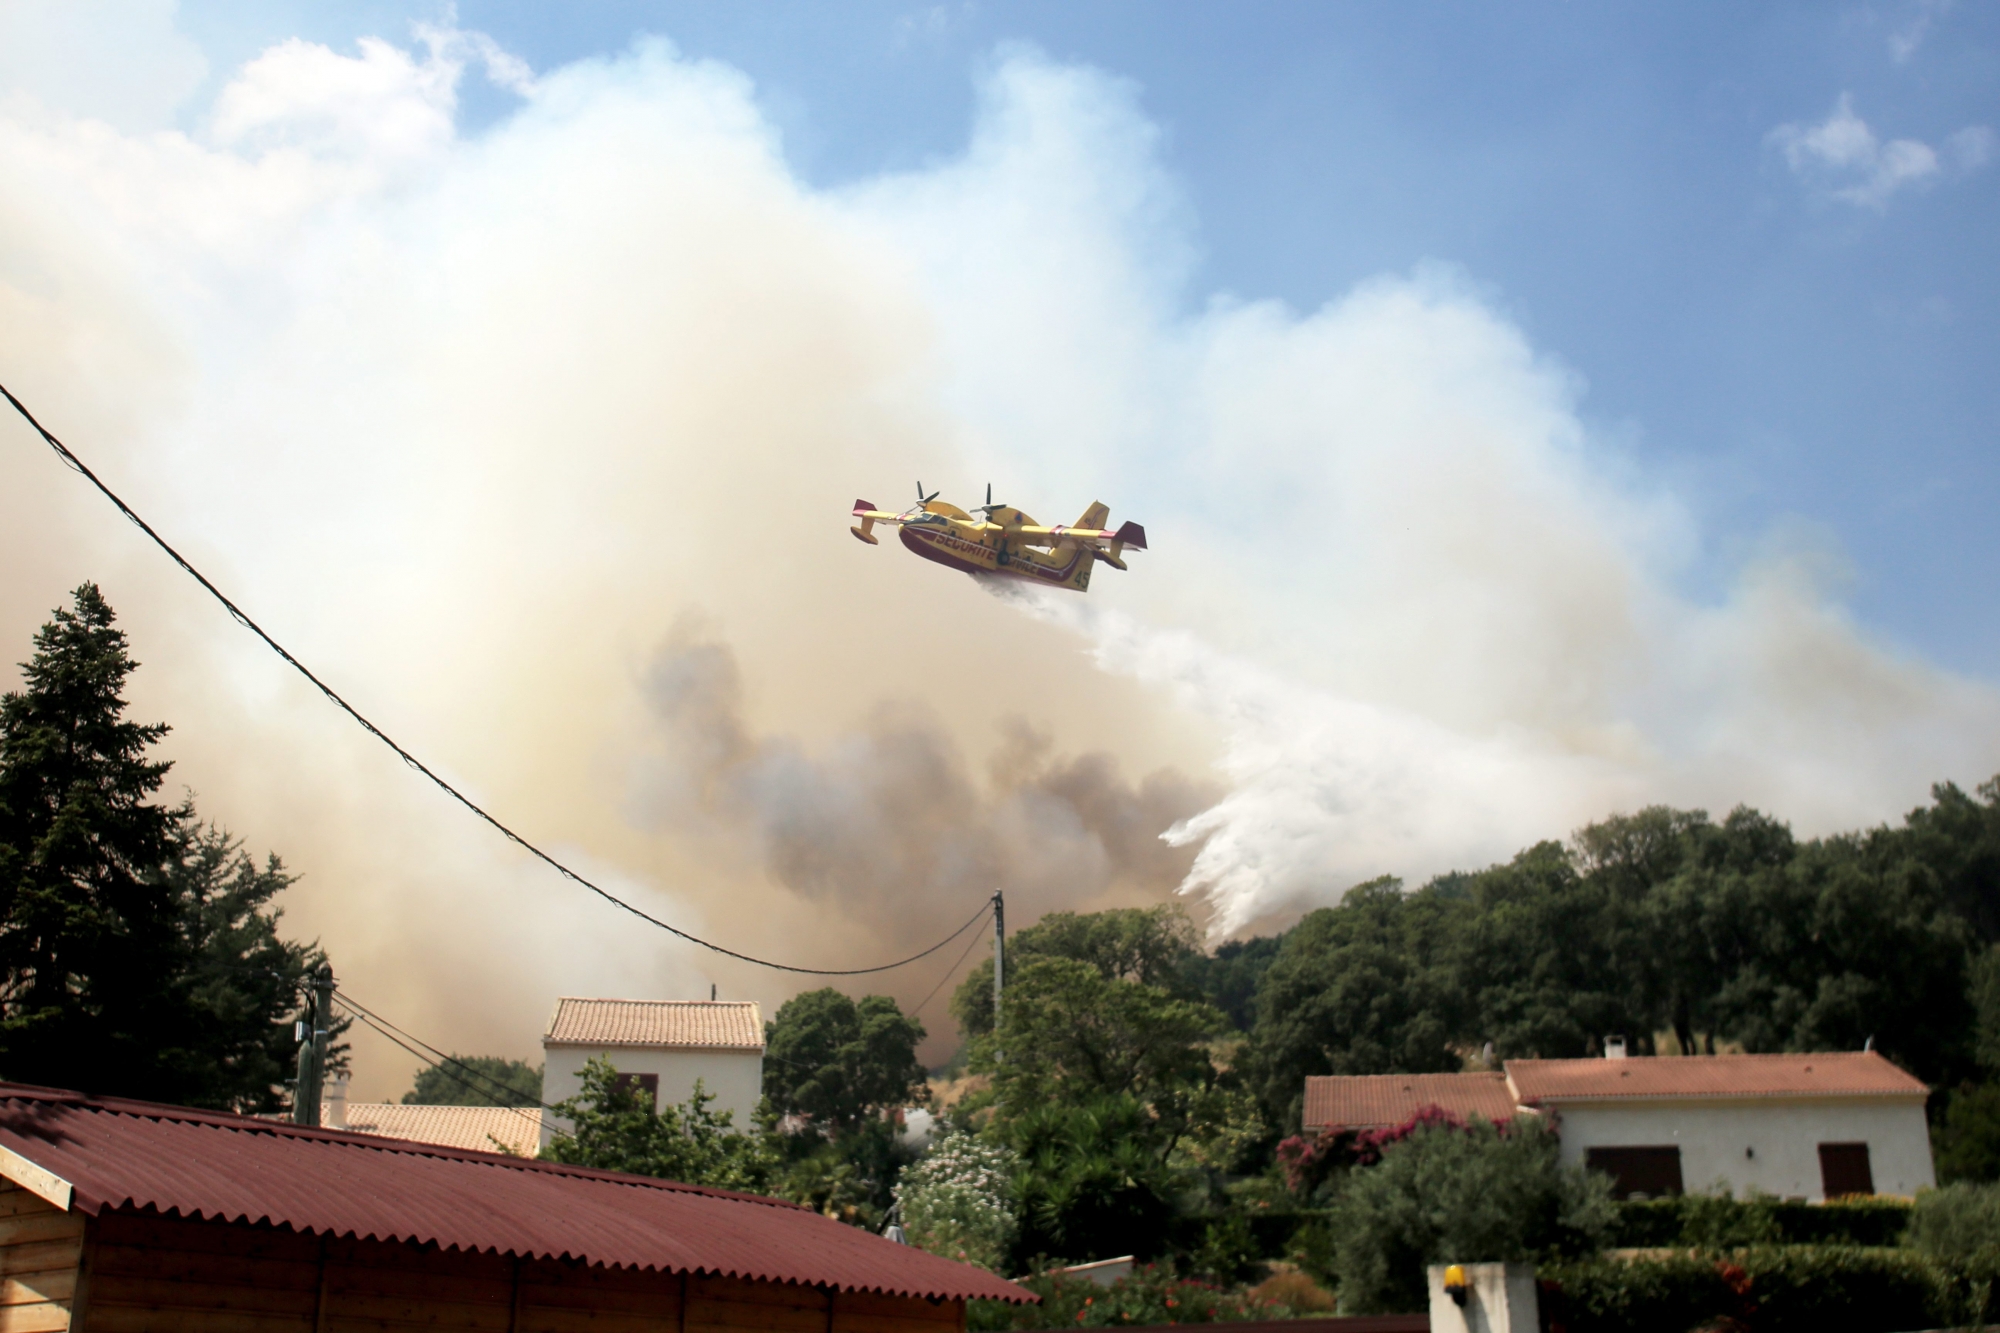 An anti-fire Canadair airplane drops water over a forest fire near the village of Ortale in Corsica, France, Tuesday, July 25, 2017. Hundreds of firefighters are battling blazes fanned by high winds in more than a dozen zones in the Riviera region of southern France. (AP Photo/Raphael Poletti) France Wildfires